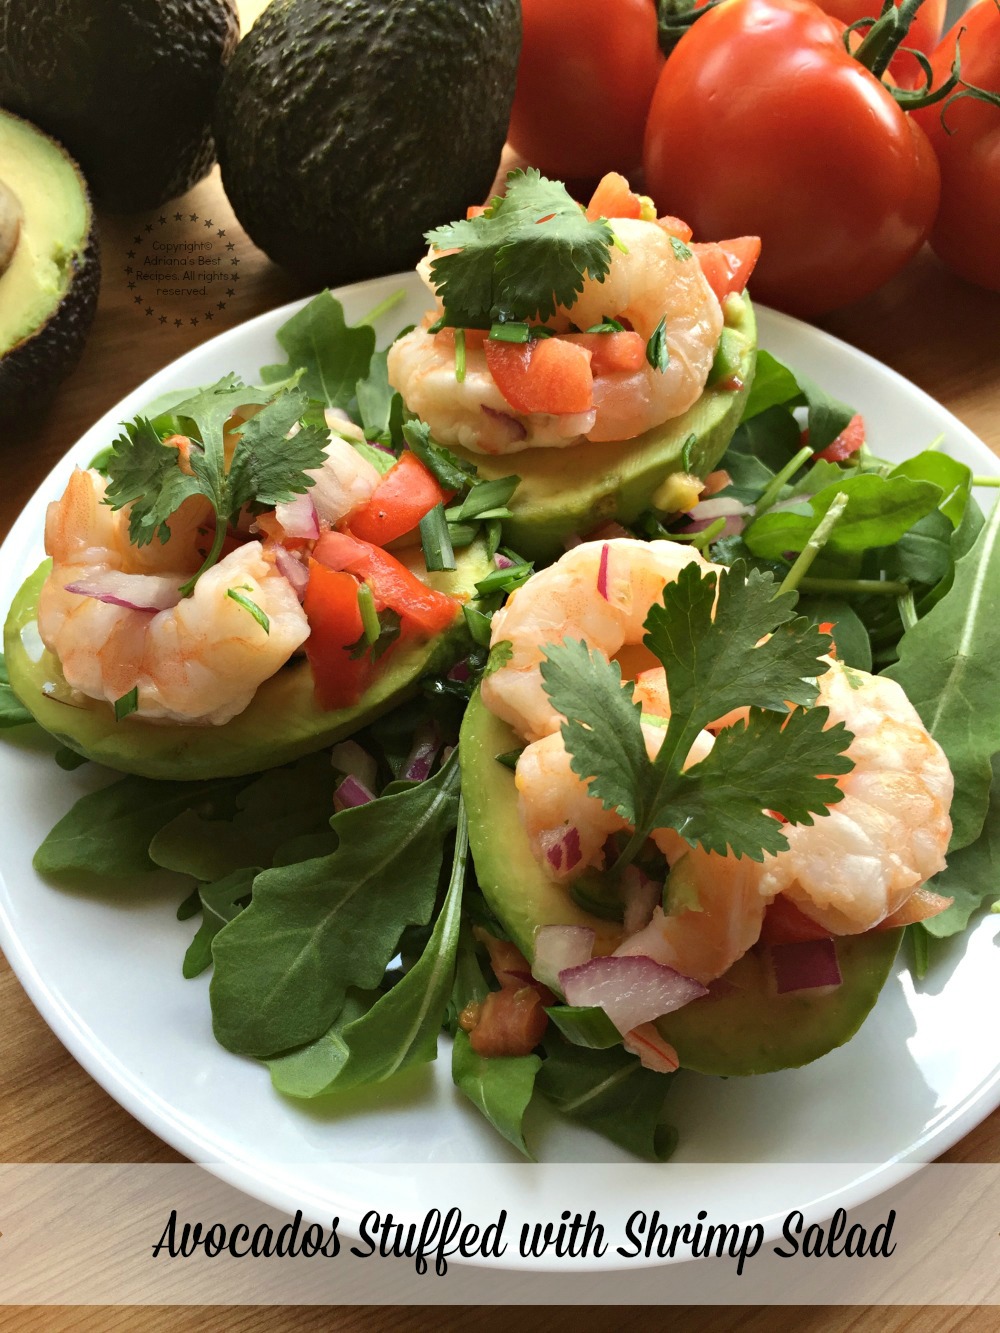 Aguacates stuffed with shrimp salad using fresh Avocados From Mexico